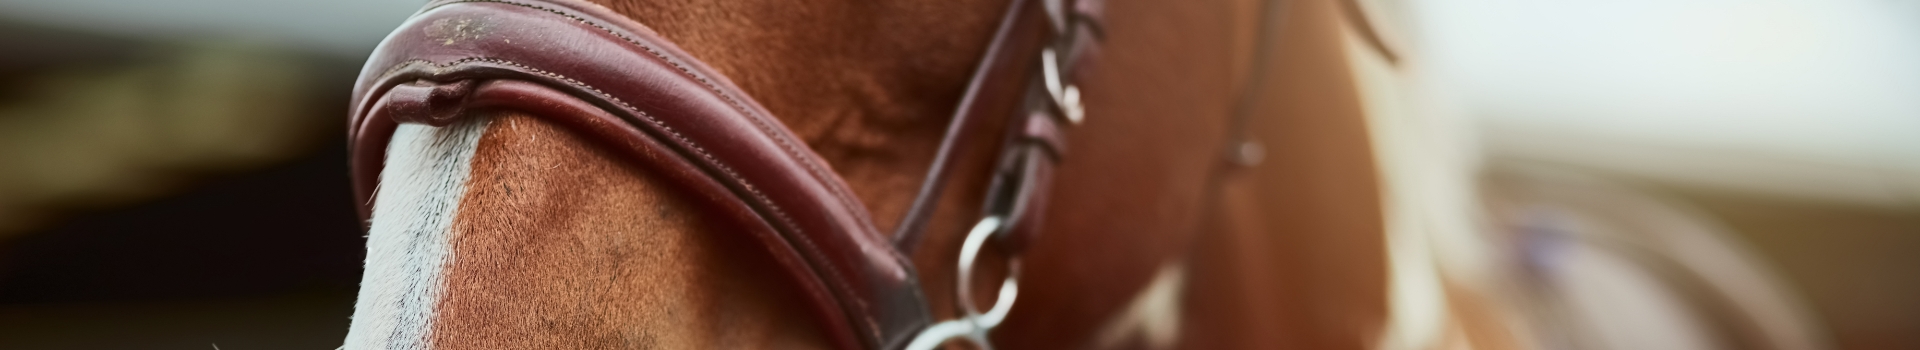 The Qatar Racing and equestrian Club is inviting applications for a Regulatory Veterinary Officer